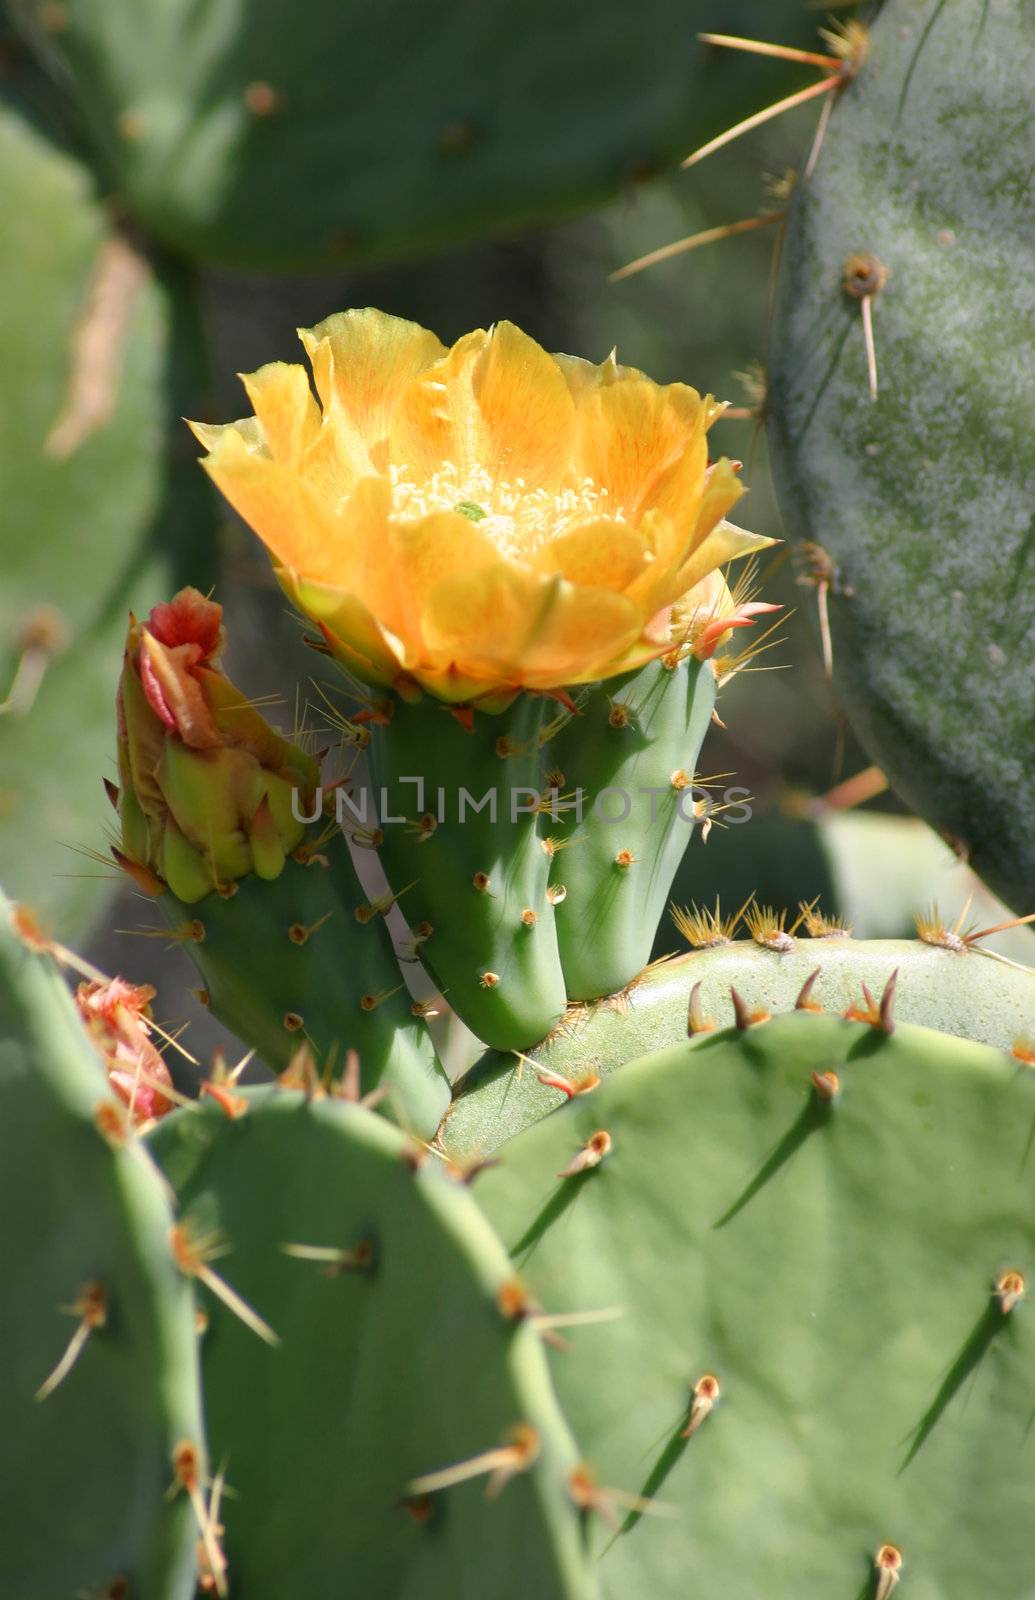 Green and Yellow Cactus Flower close up in the Desert